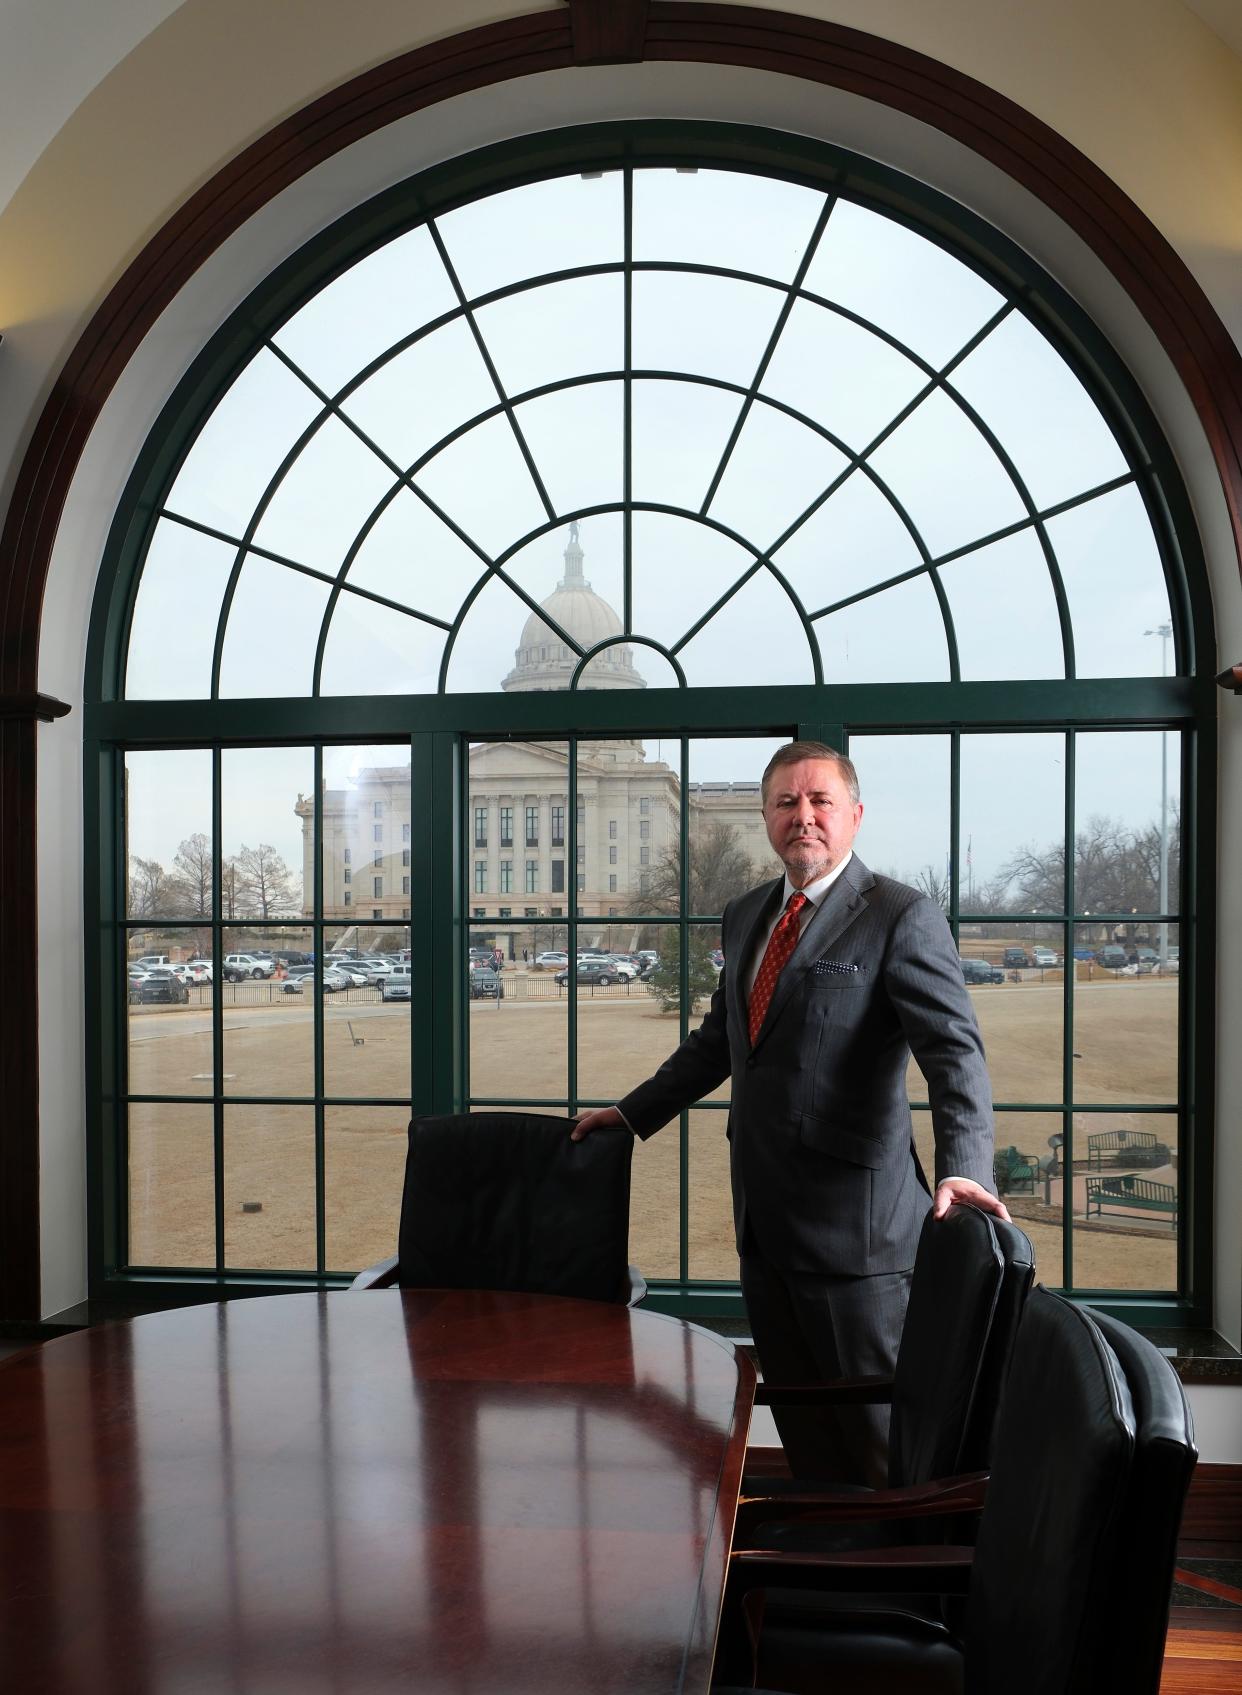 Oklahoma Attorney General Gentner Drummond is pictured Feb. 21 in his office. Since entering office last month, Drummond, a Republican, has taken on multiple investigations with connections to the governor or his Cabinet members. He said those cases required the prosecutorial muscle only the attorney general’s office could provide.